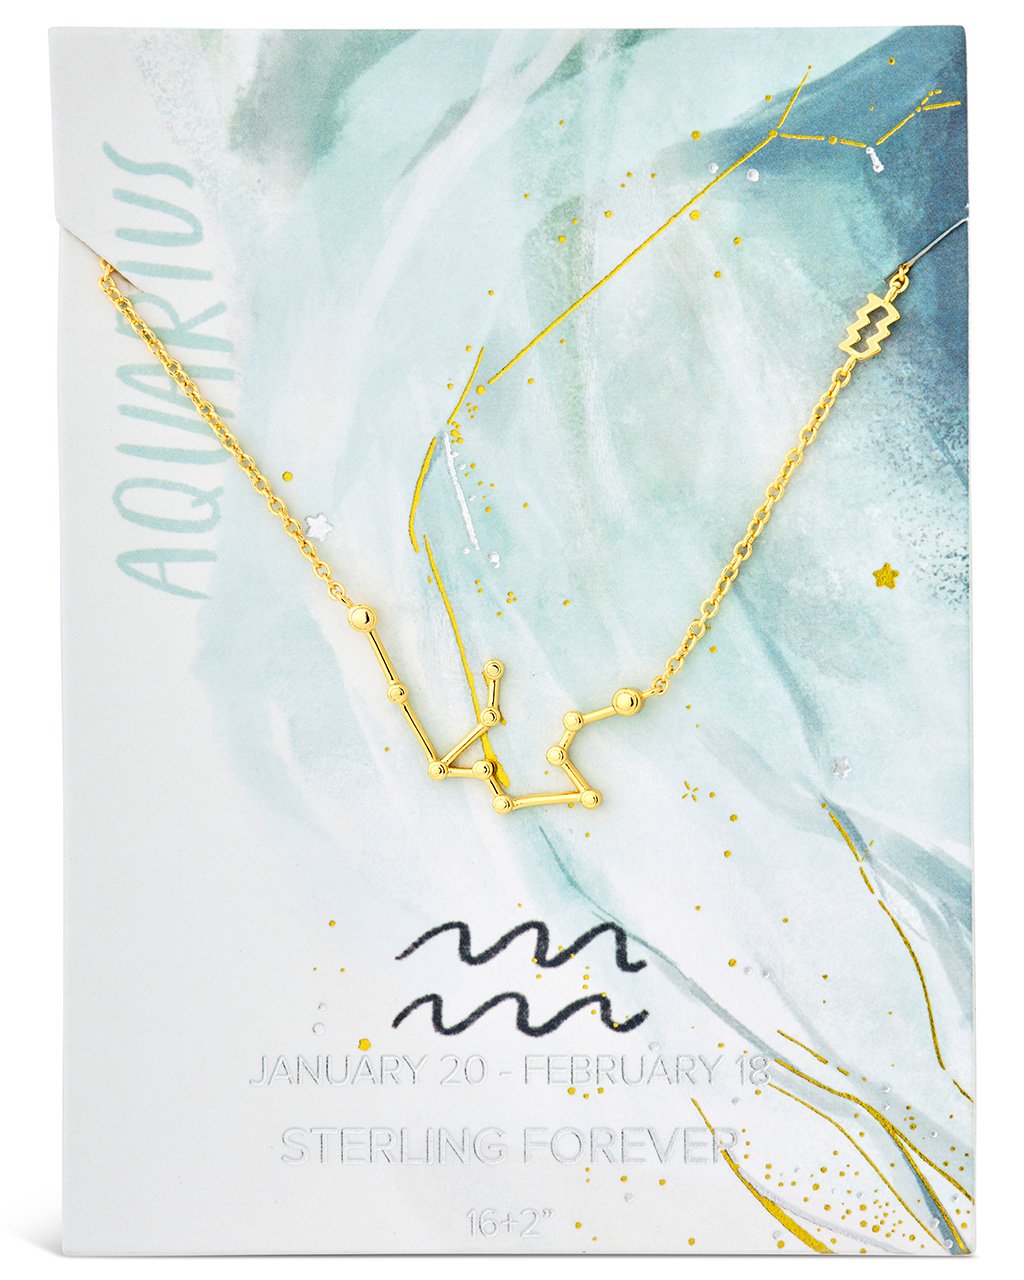 Station Constellation Pendant Necklace Necklace Sterling Forever Gold Aquarius (Jan 20 - Feb 18) 